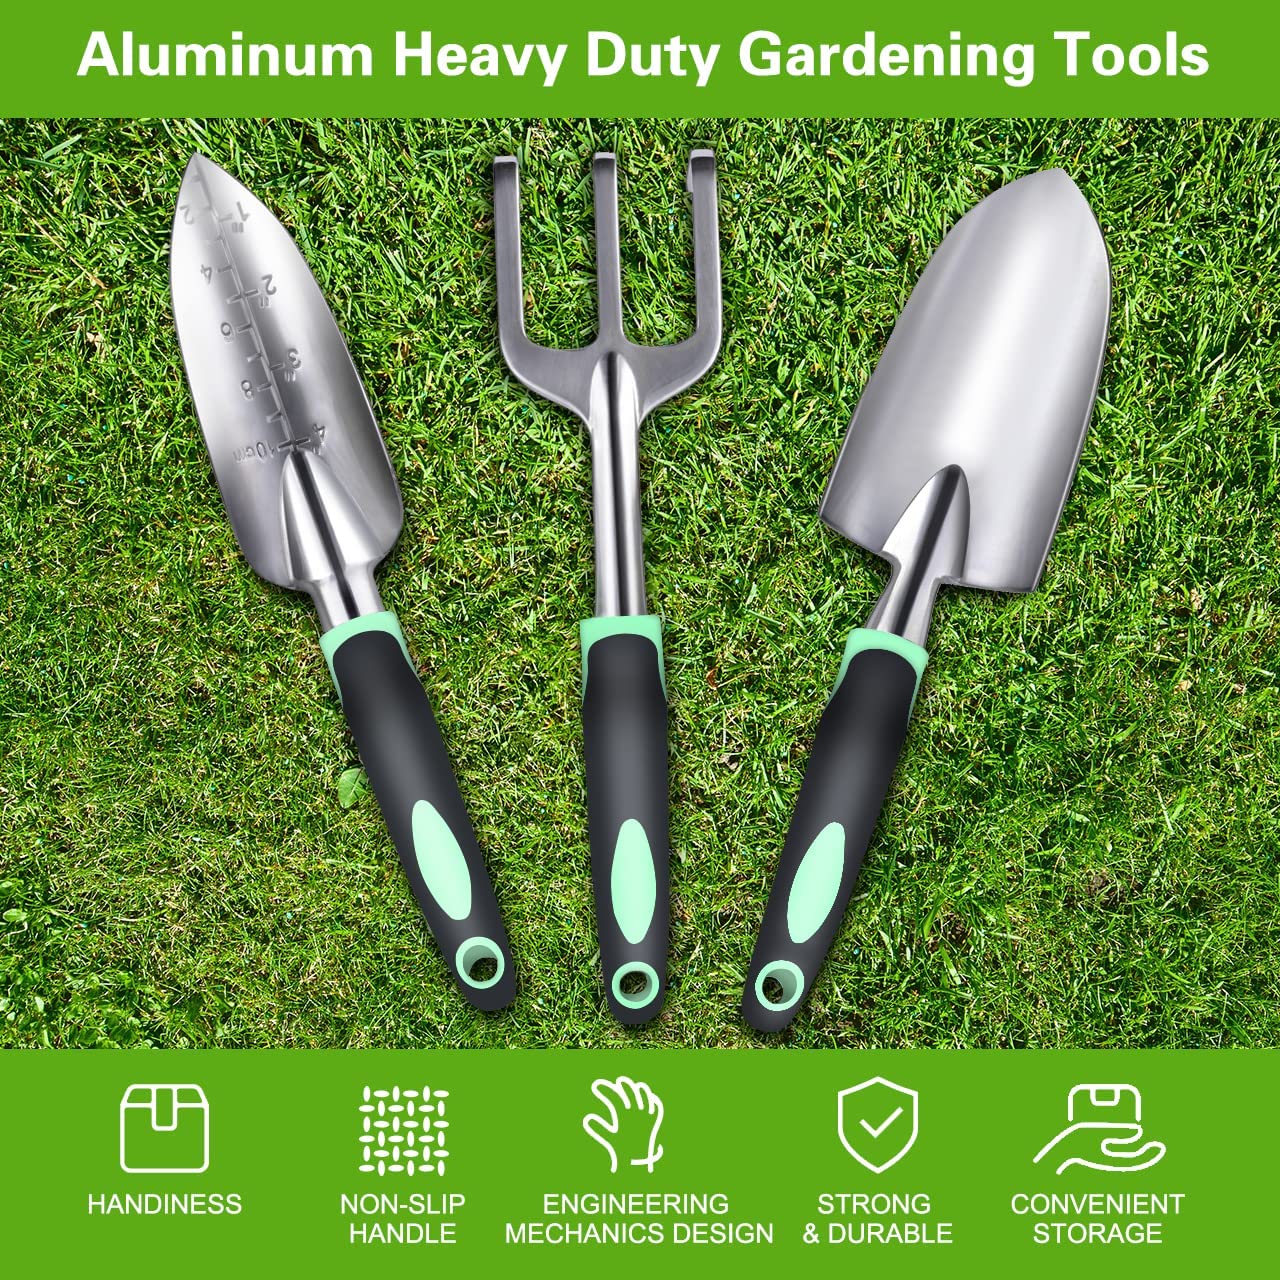 Garden Tool Set 3 Pack Aluminum Heavy Duty Gardening Kit Includes Hand Trowel Transplant Trowel and Cultivator Hand Rake with Soft Rubberized Non-Slip Ergonomic Handle Garden Gifts